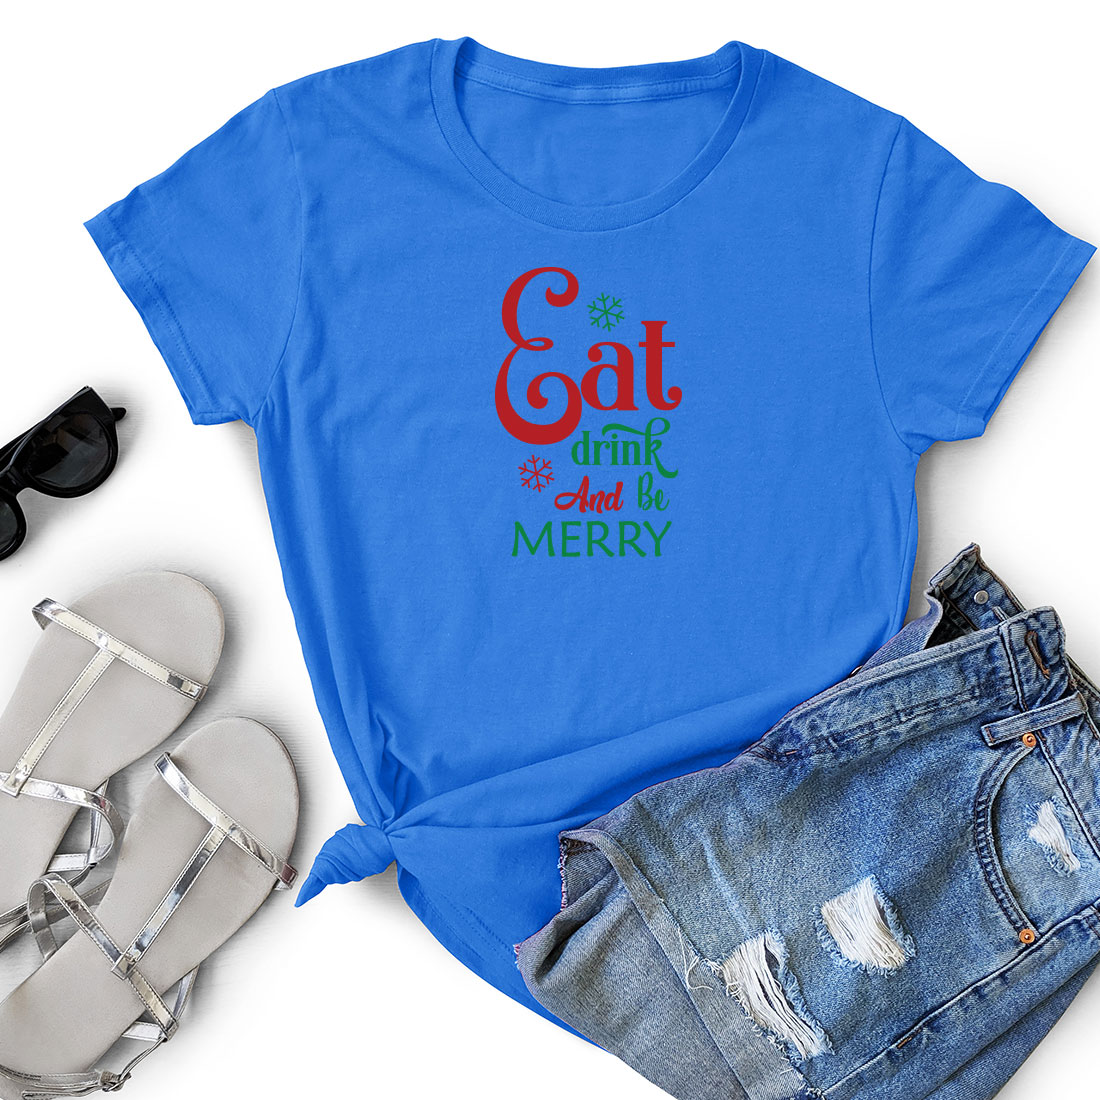 T - shirt that says eat drink and be merry.